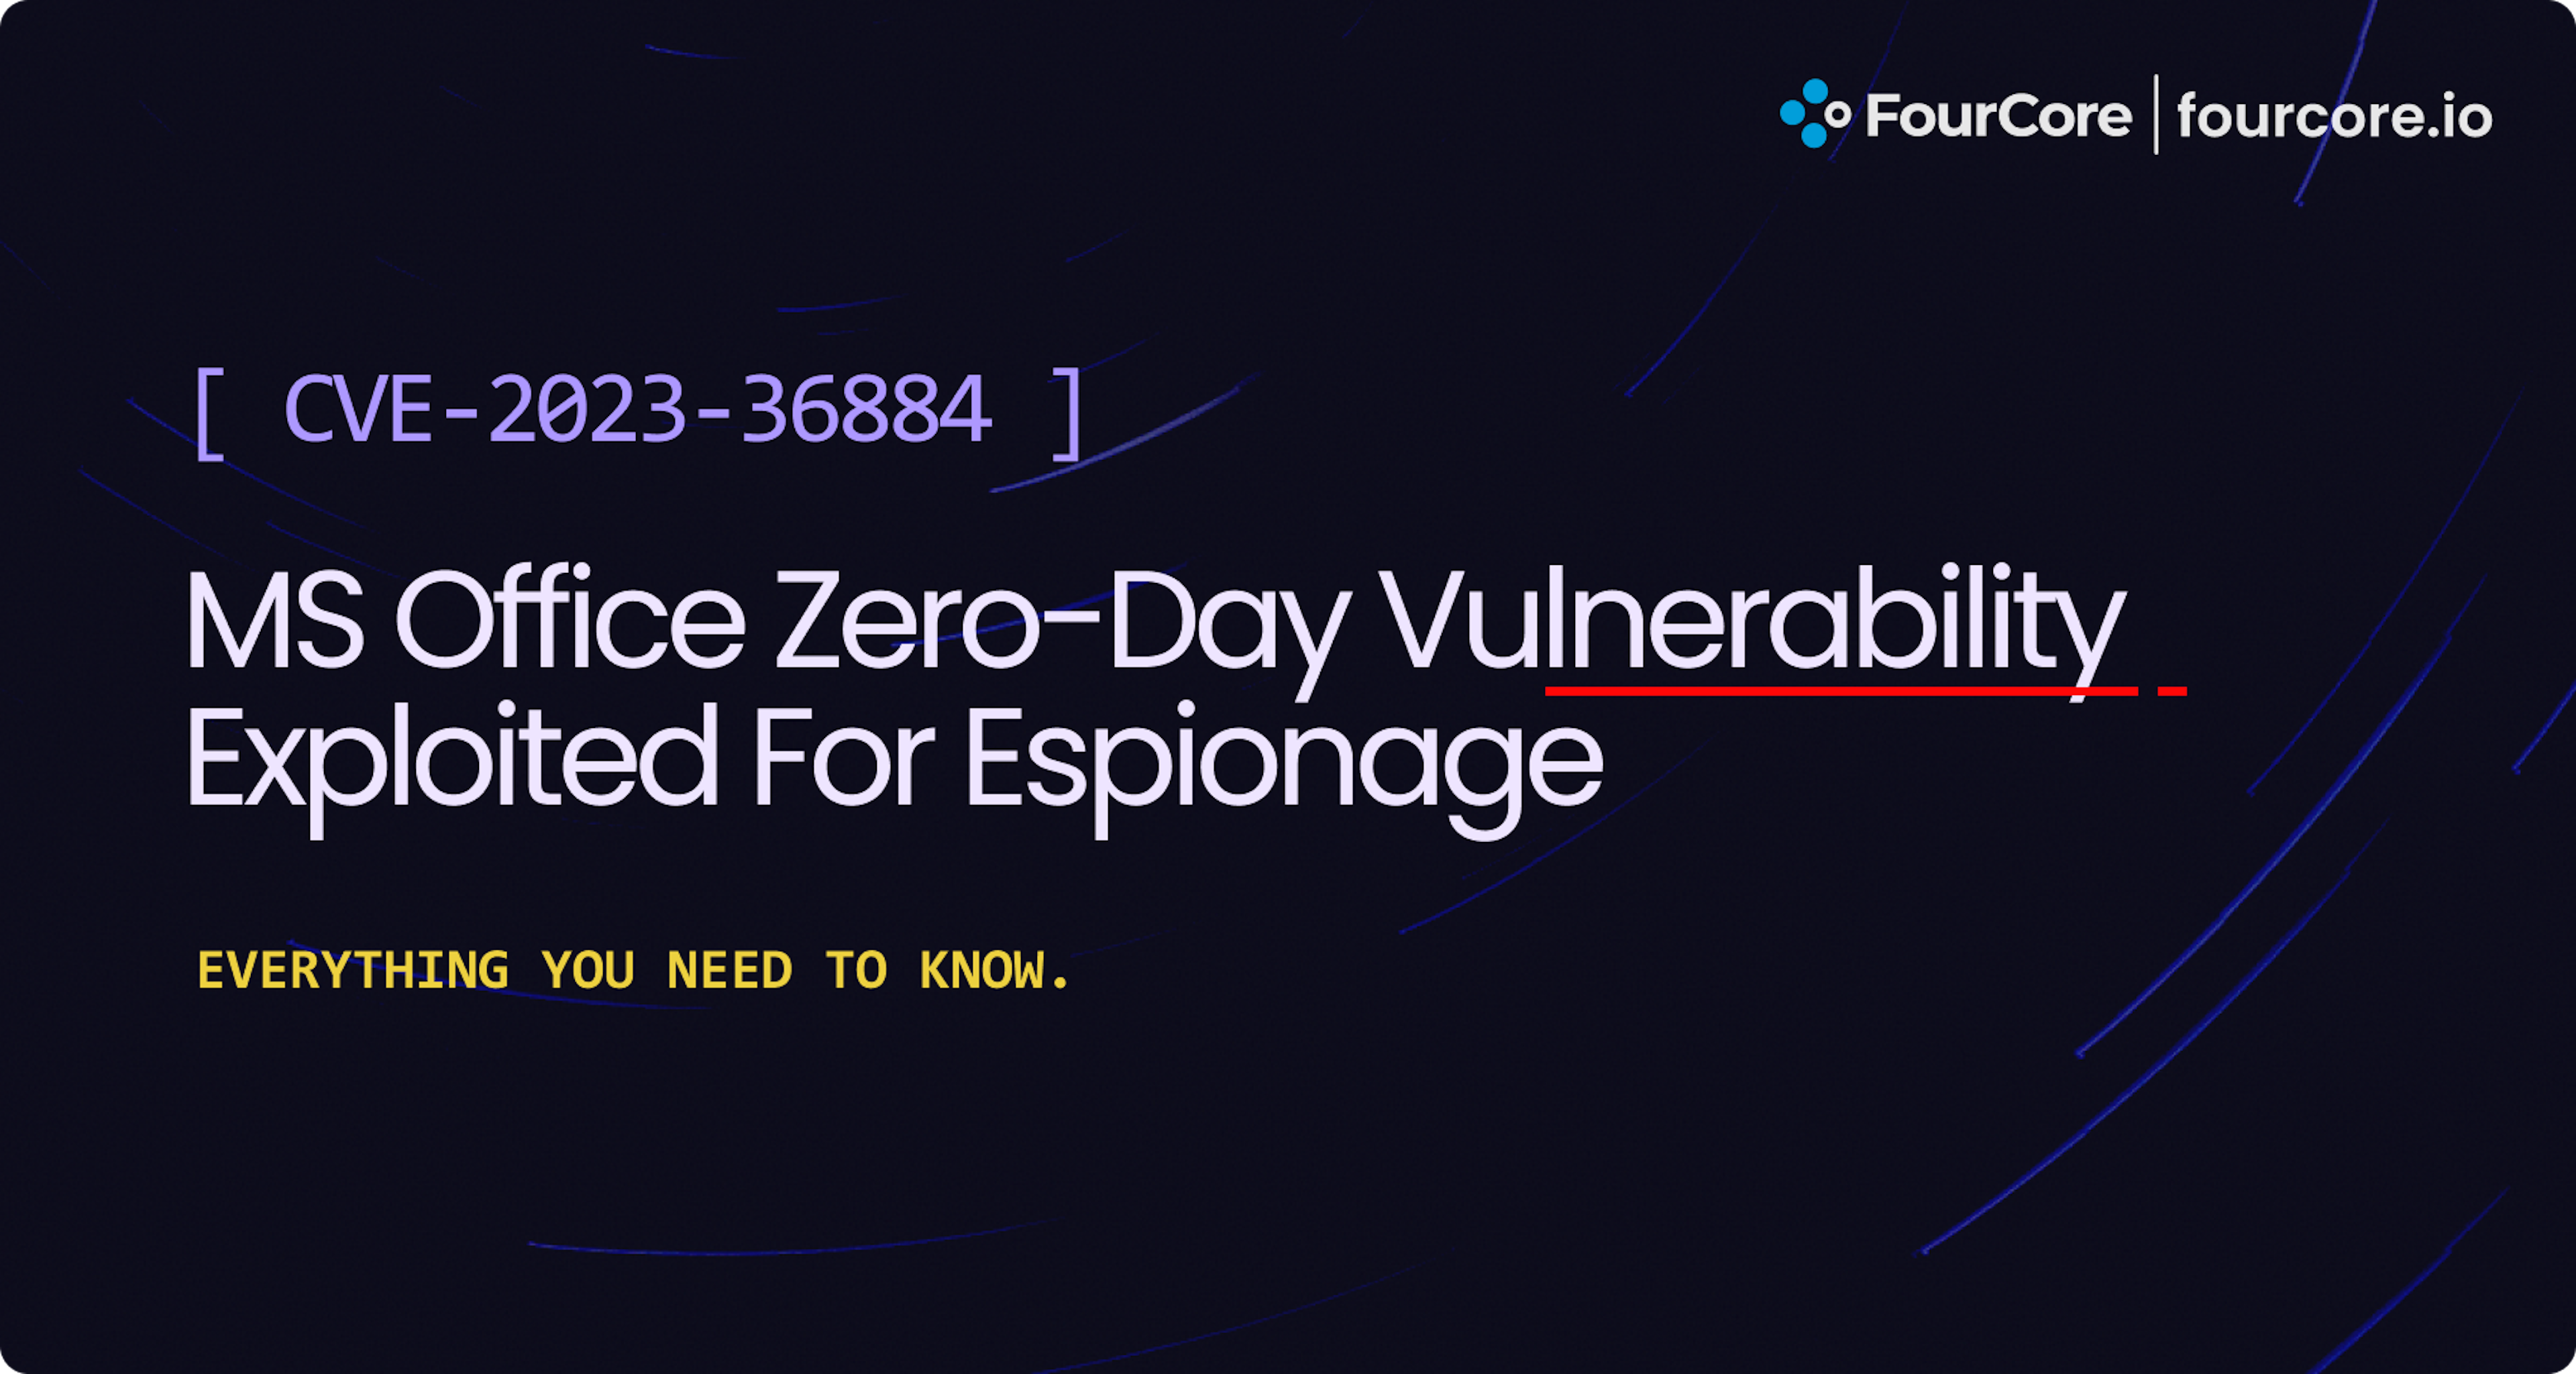 CVE-2023-36884 MS Office Zero-Day Vulnerability Exploited For Espionage - Detection and Mitigation Blog Post Image